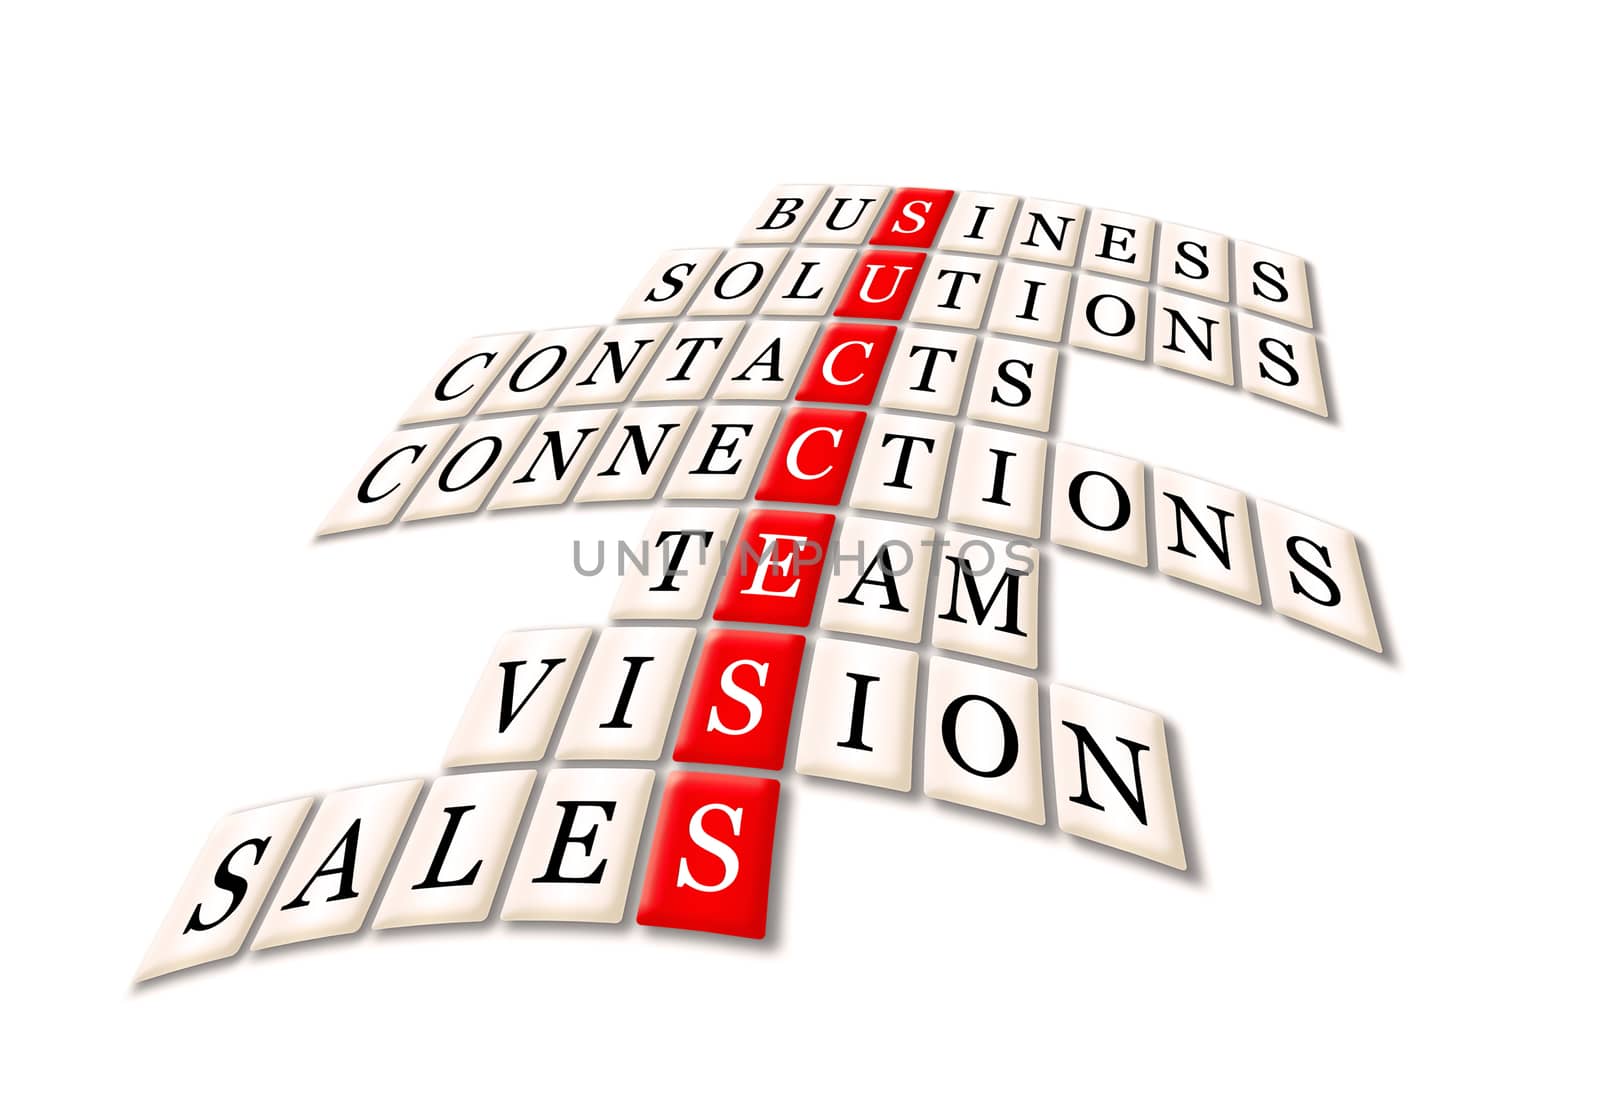 acronym of success- business, solutions, contacts, connections, team,vision,sales